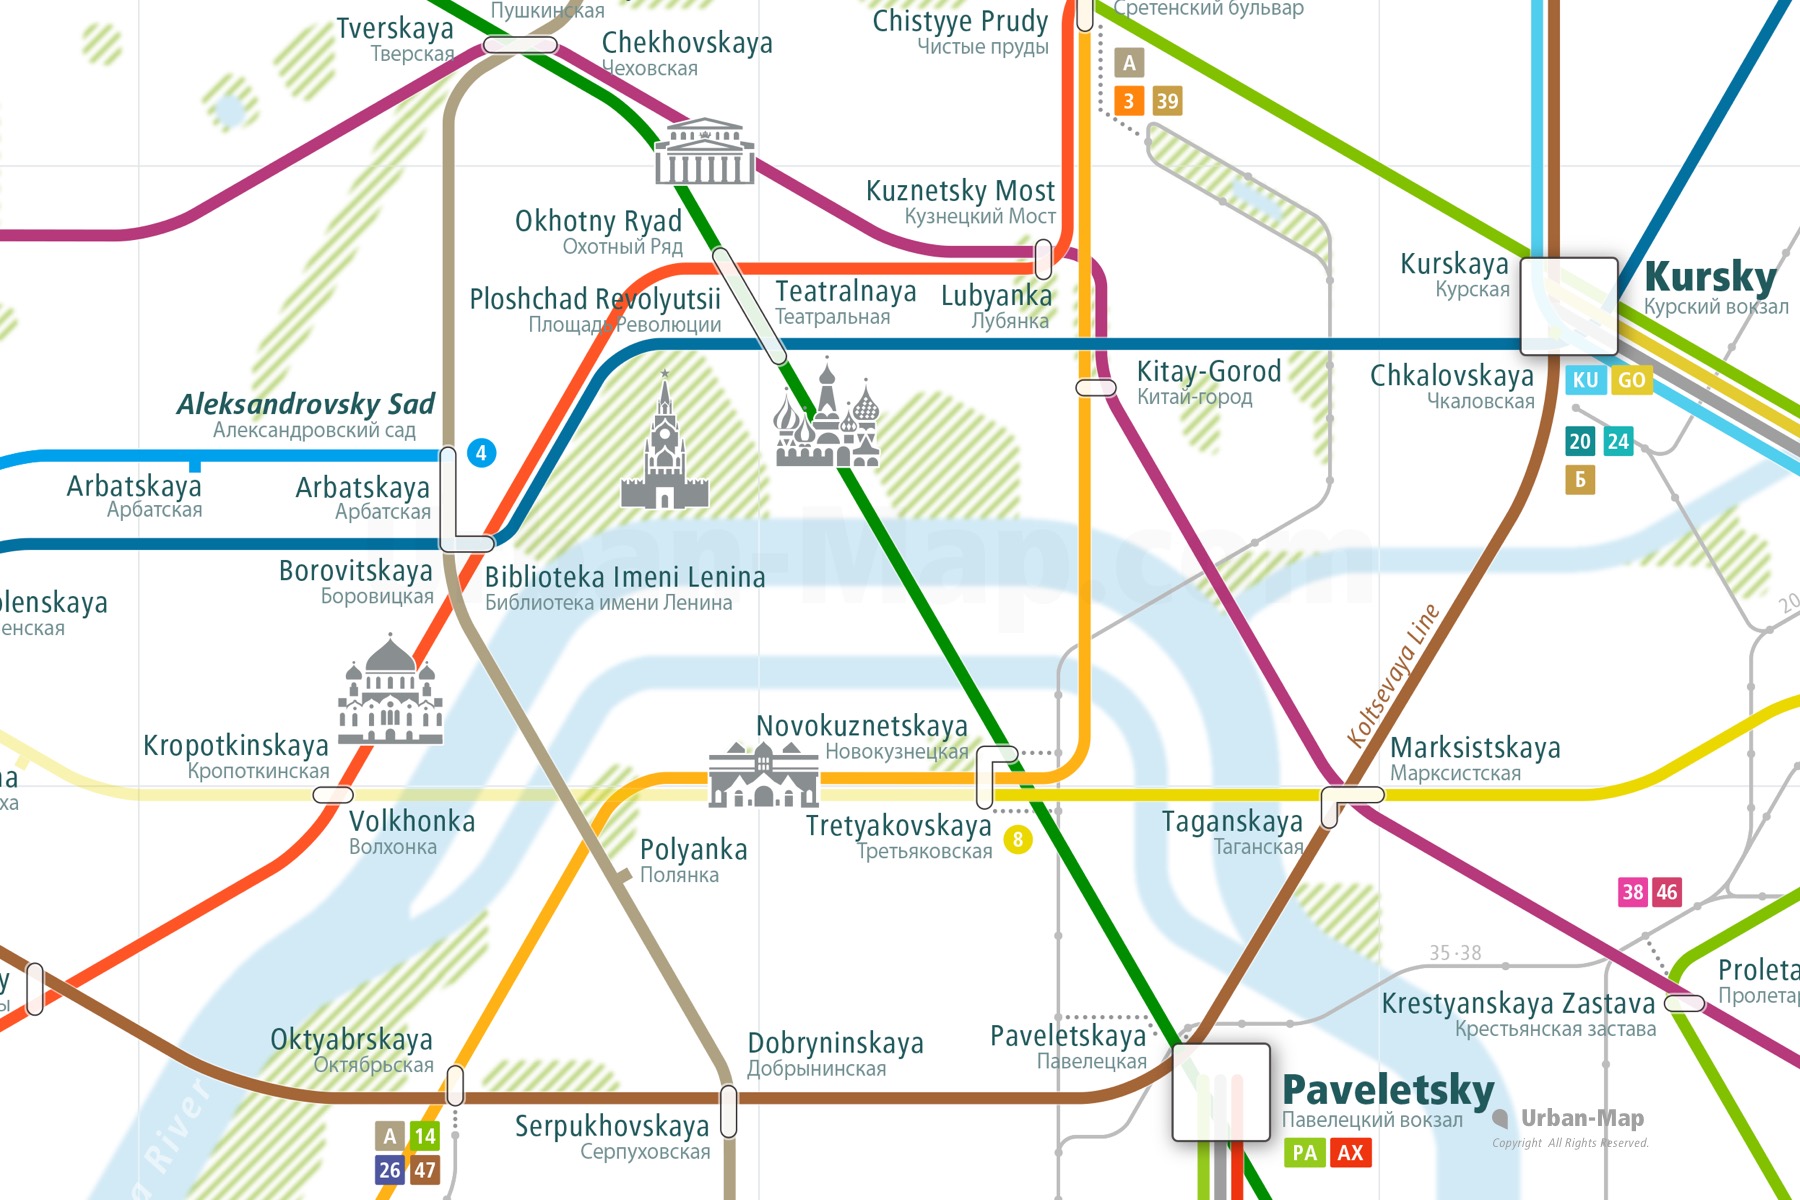 Moscow City Rail Map shows the train and public transportation routes of Metro, Tram, Airport Link, Ferry, Commuter Train - Close-Up